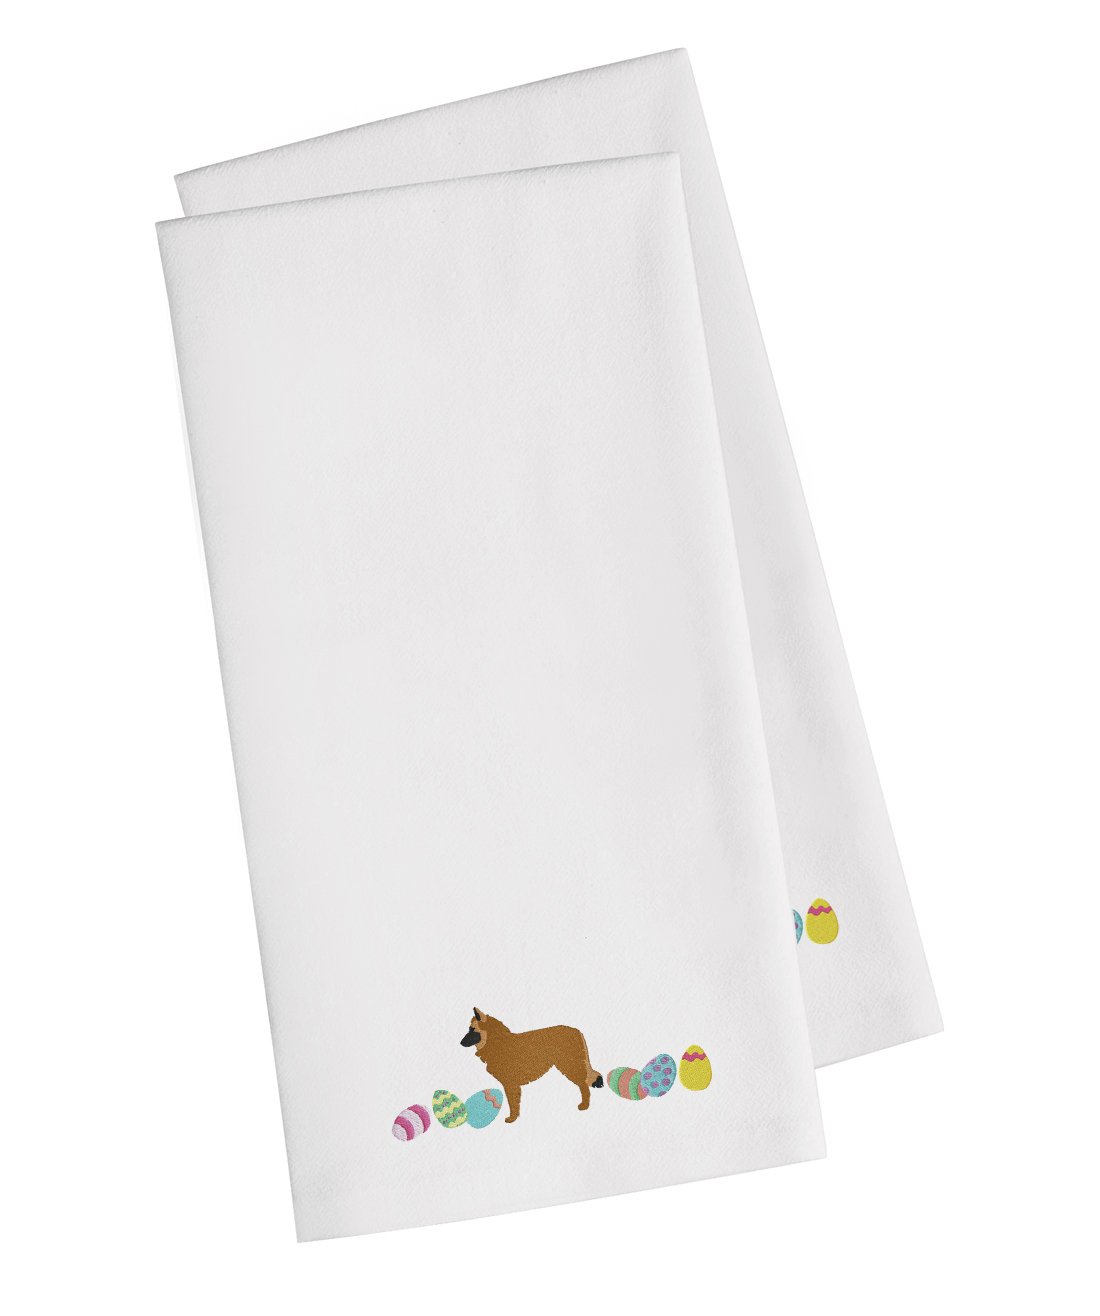 Belgian Sheepdog Easter White Embroidered Kitchen Towel Set of 2 CK1607WHTWE by Caroline's Treasures